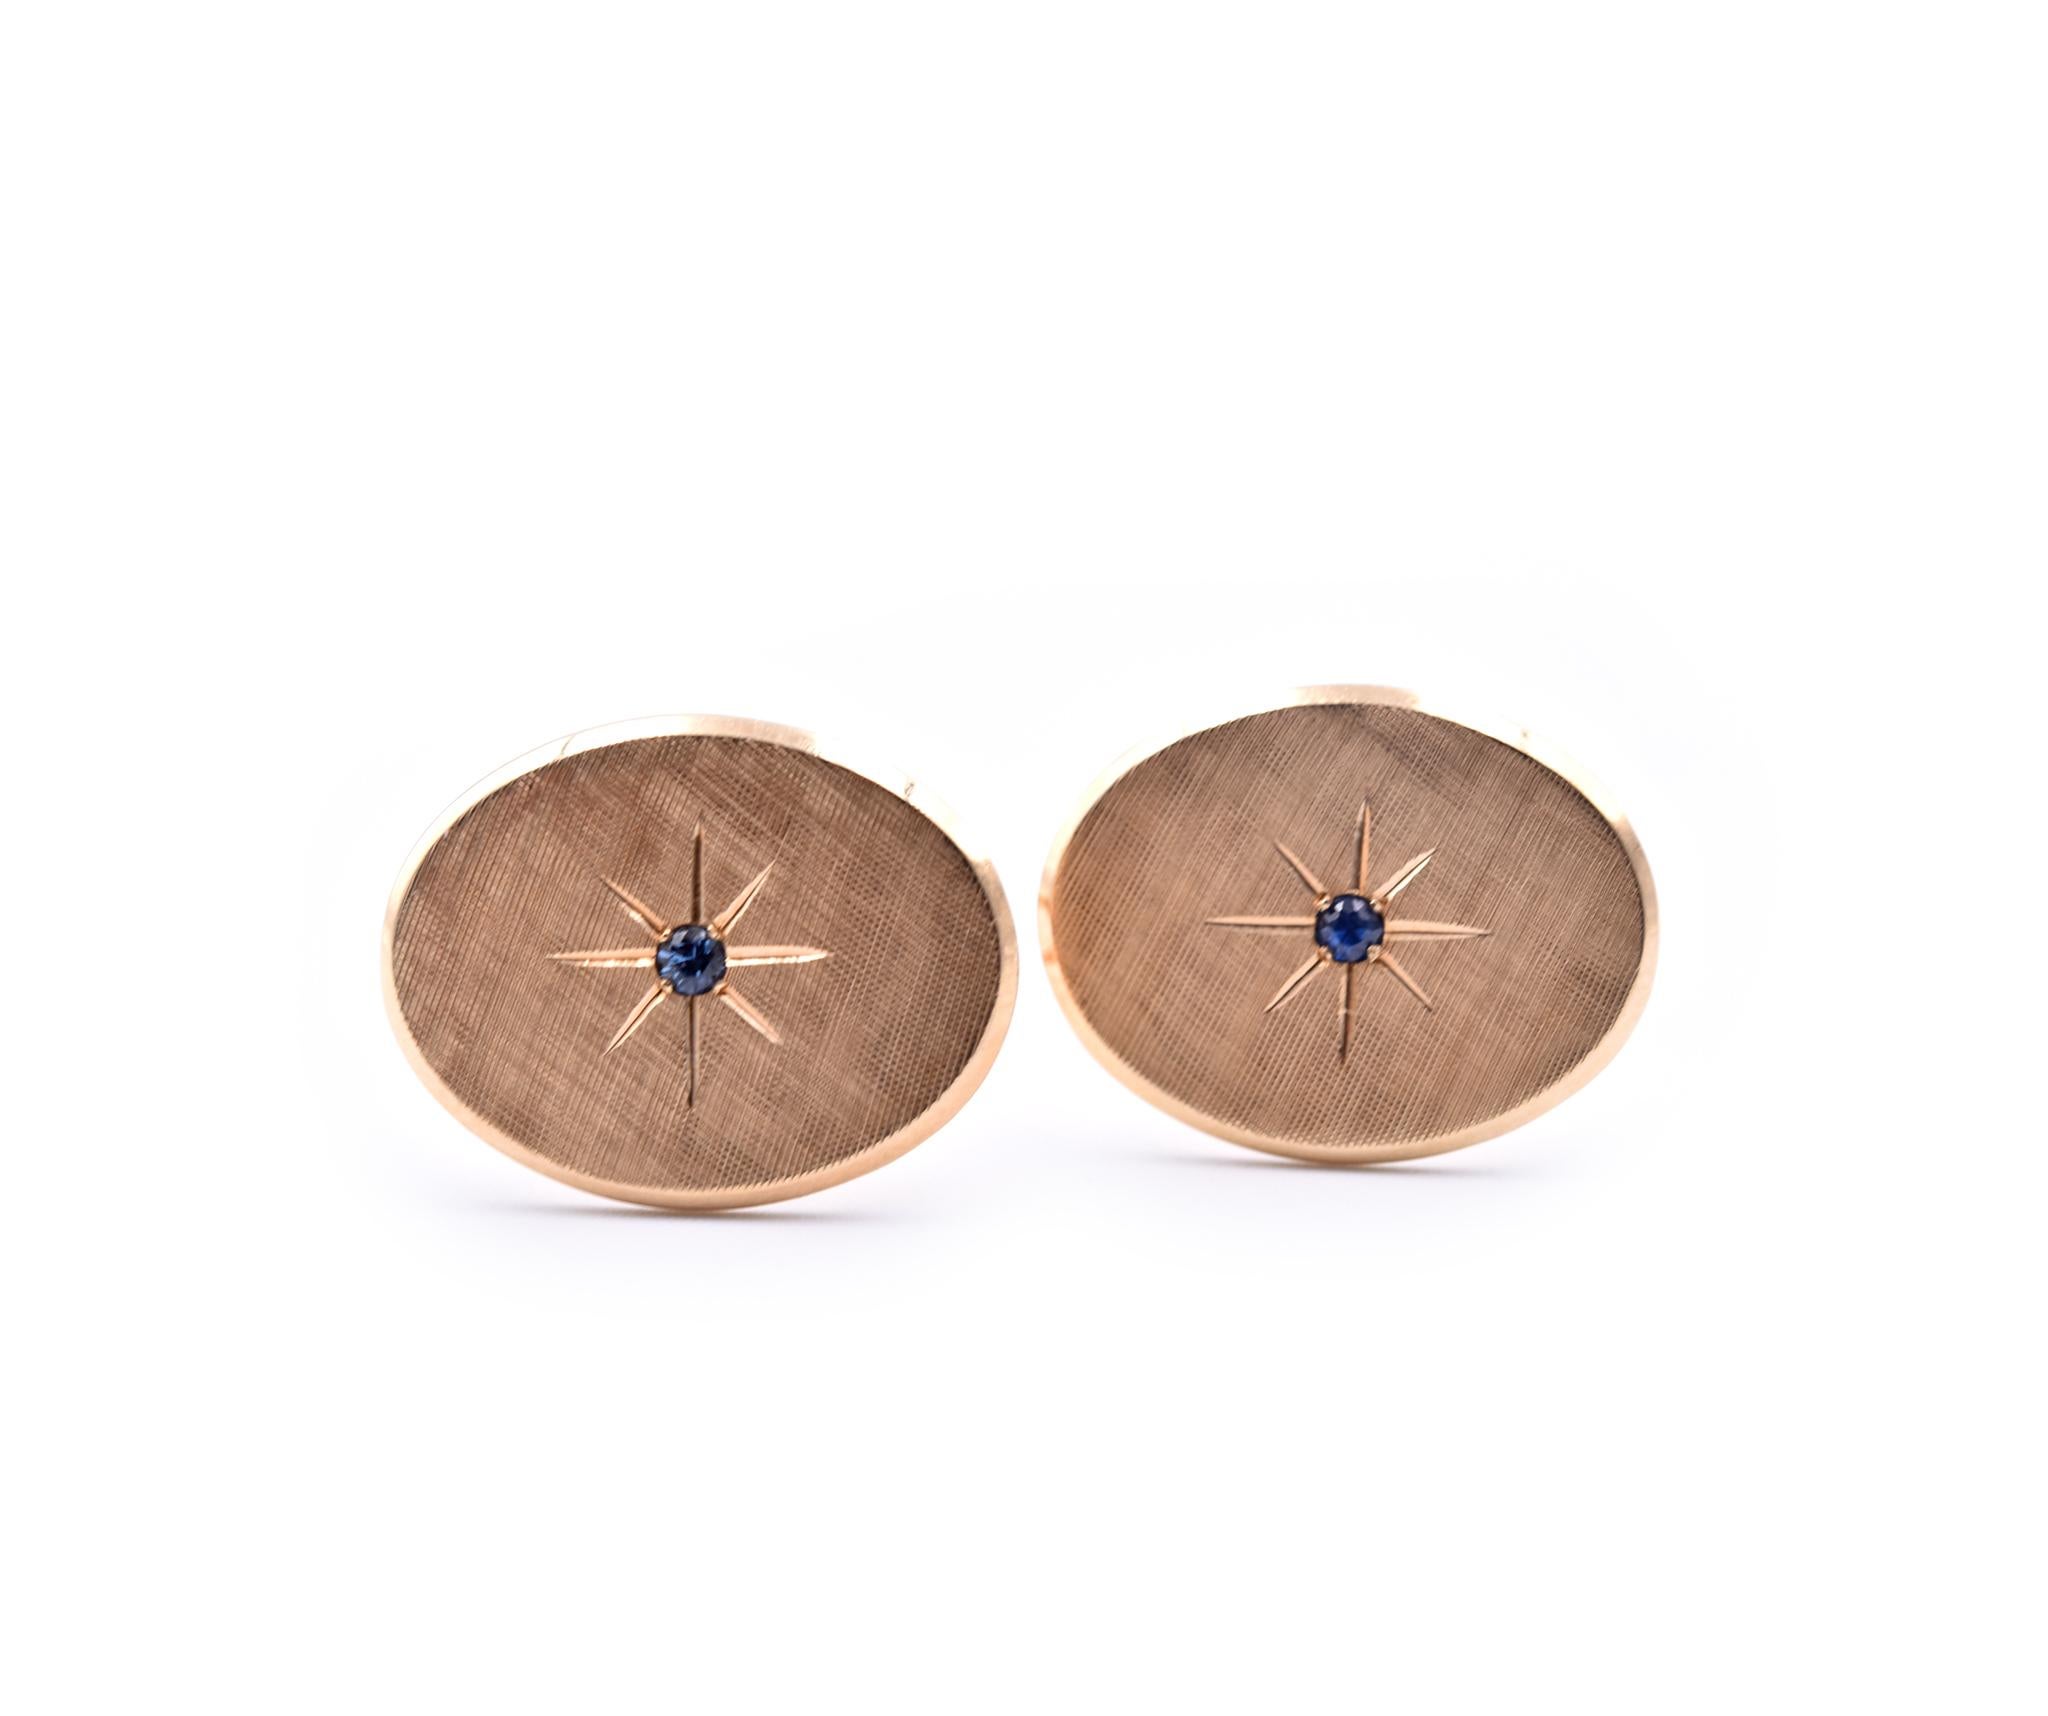 Designer: Tiffany & Co.
Material: 14k yellow gold
Sapphires: 2 round cut sapphires
Dimensions: cufflinks measure 16.60mm x 21.40mm
Weight: 11.96 grams